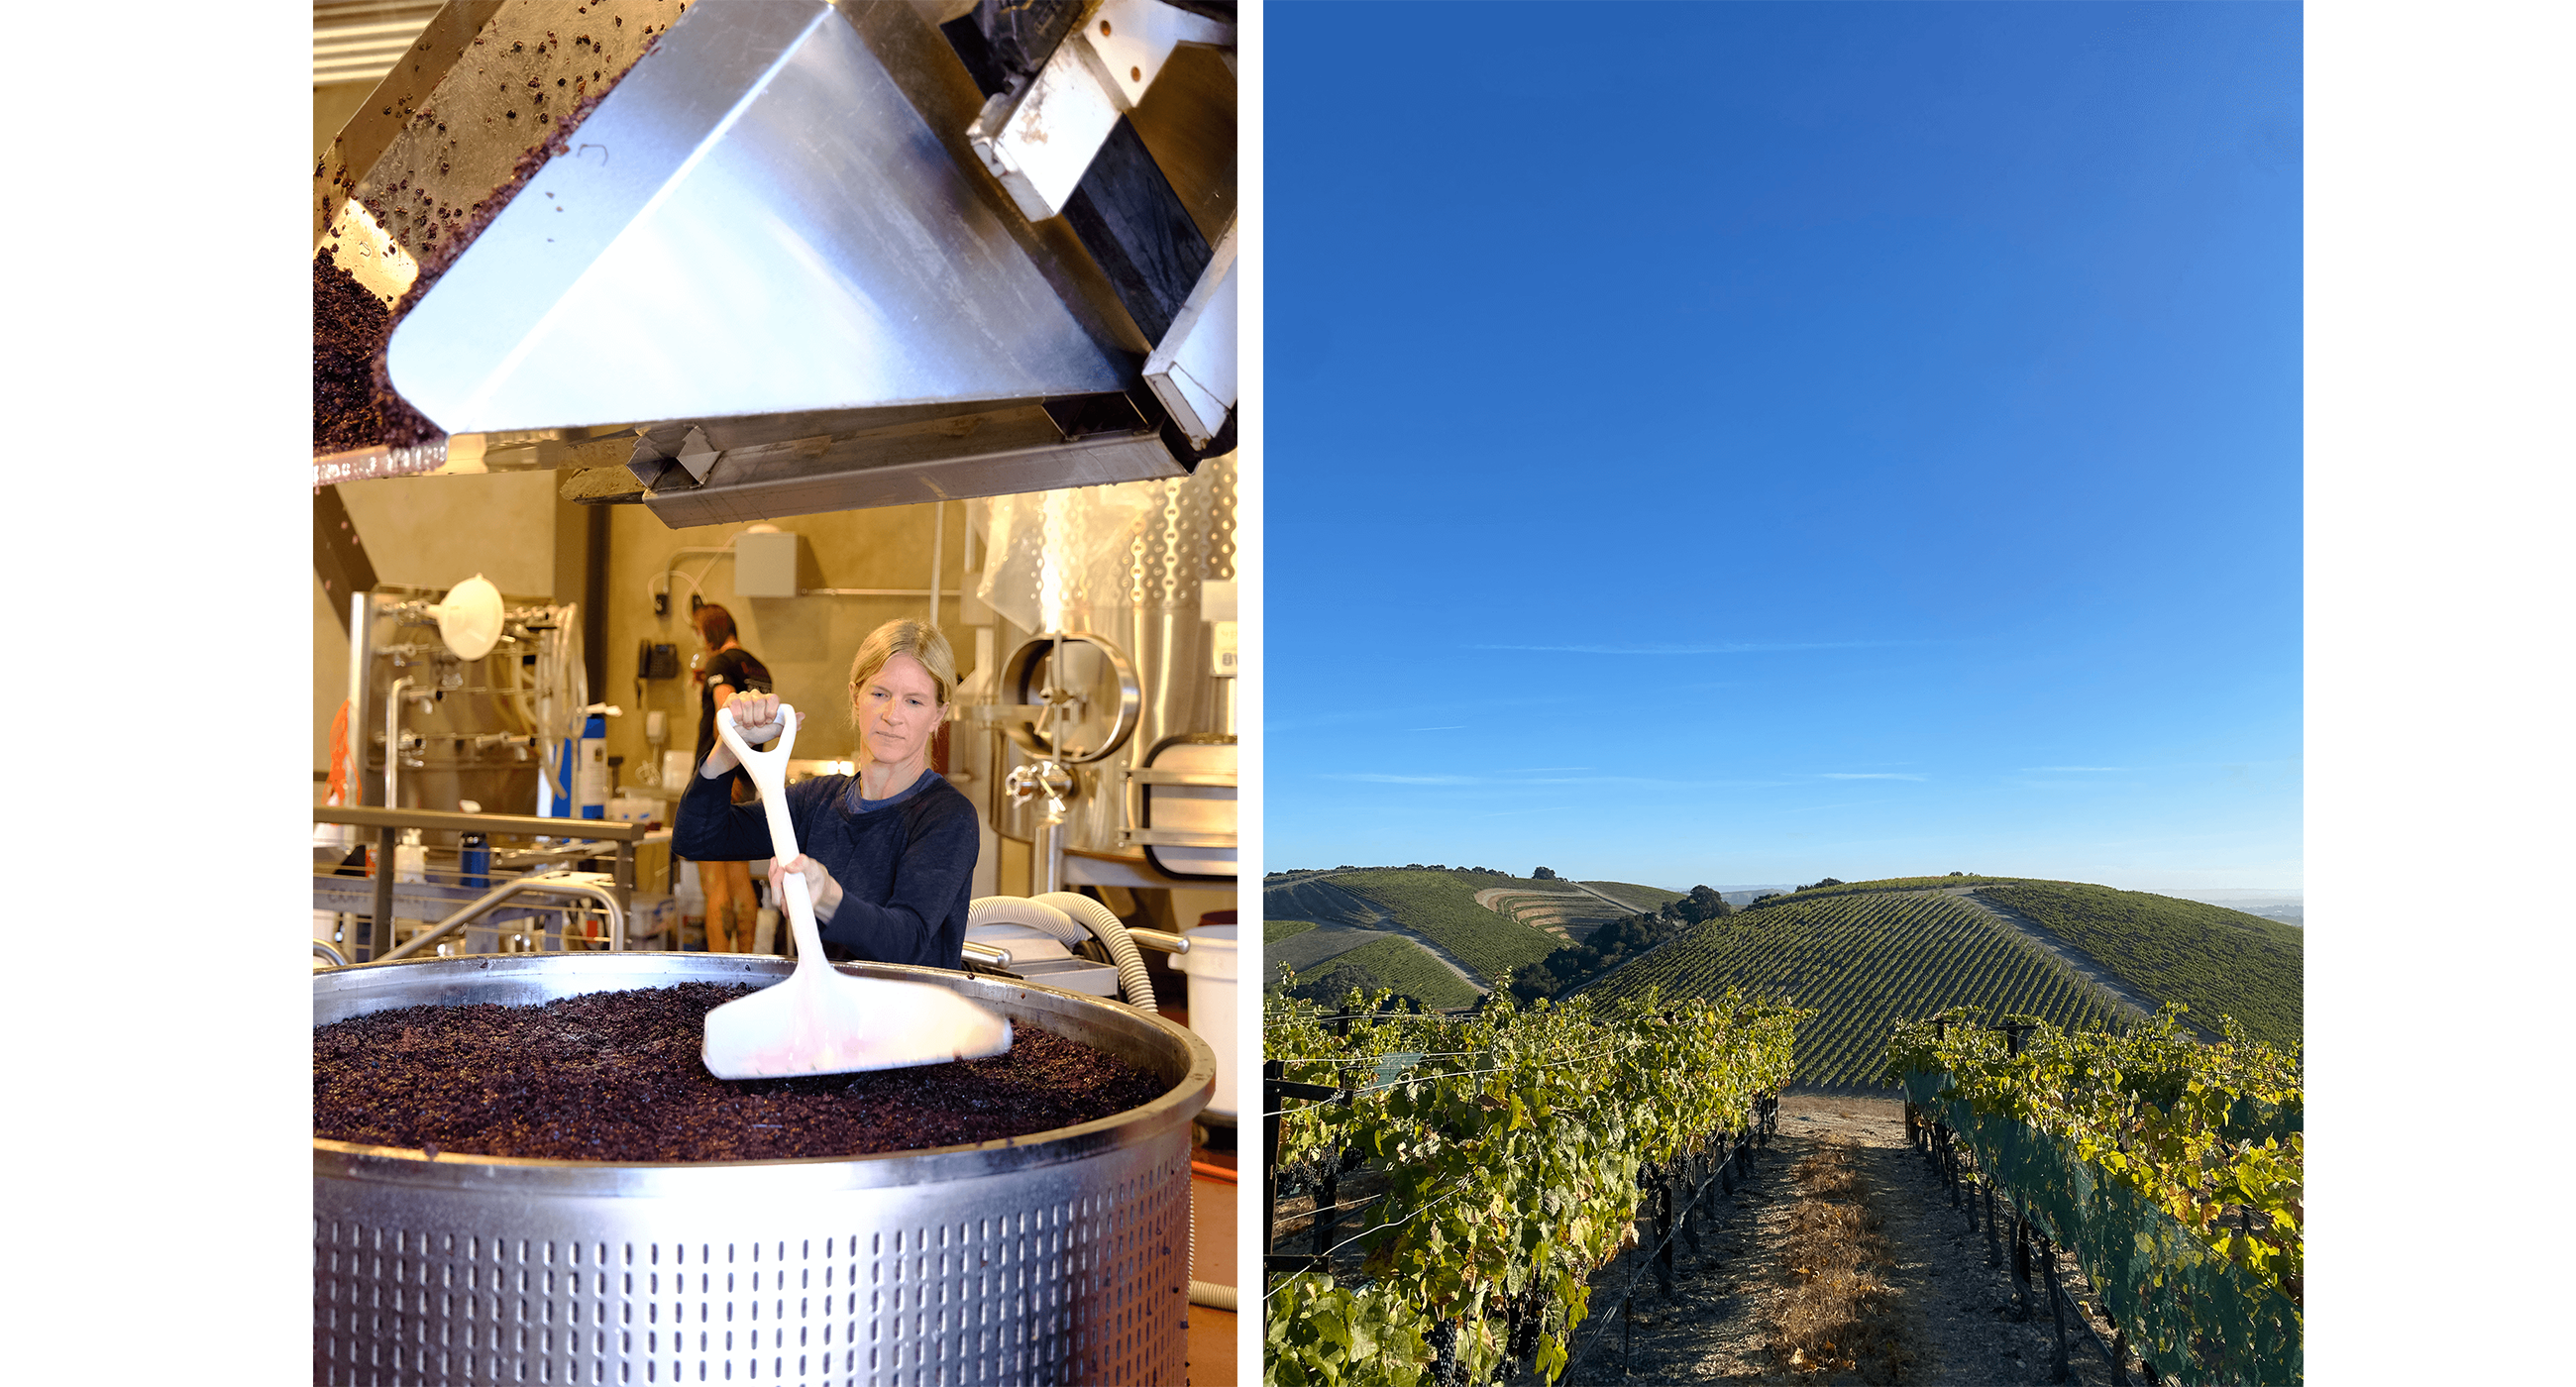 A winemaker taps down on grapeskins packed into a basket press. On the right, a bright blue sky is shown over a vineyard with Fall colors.